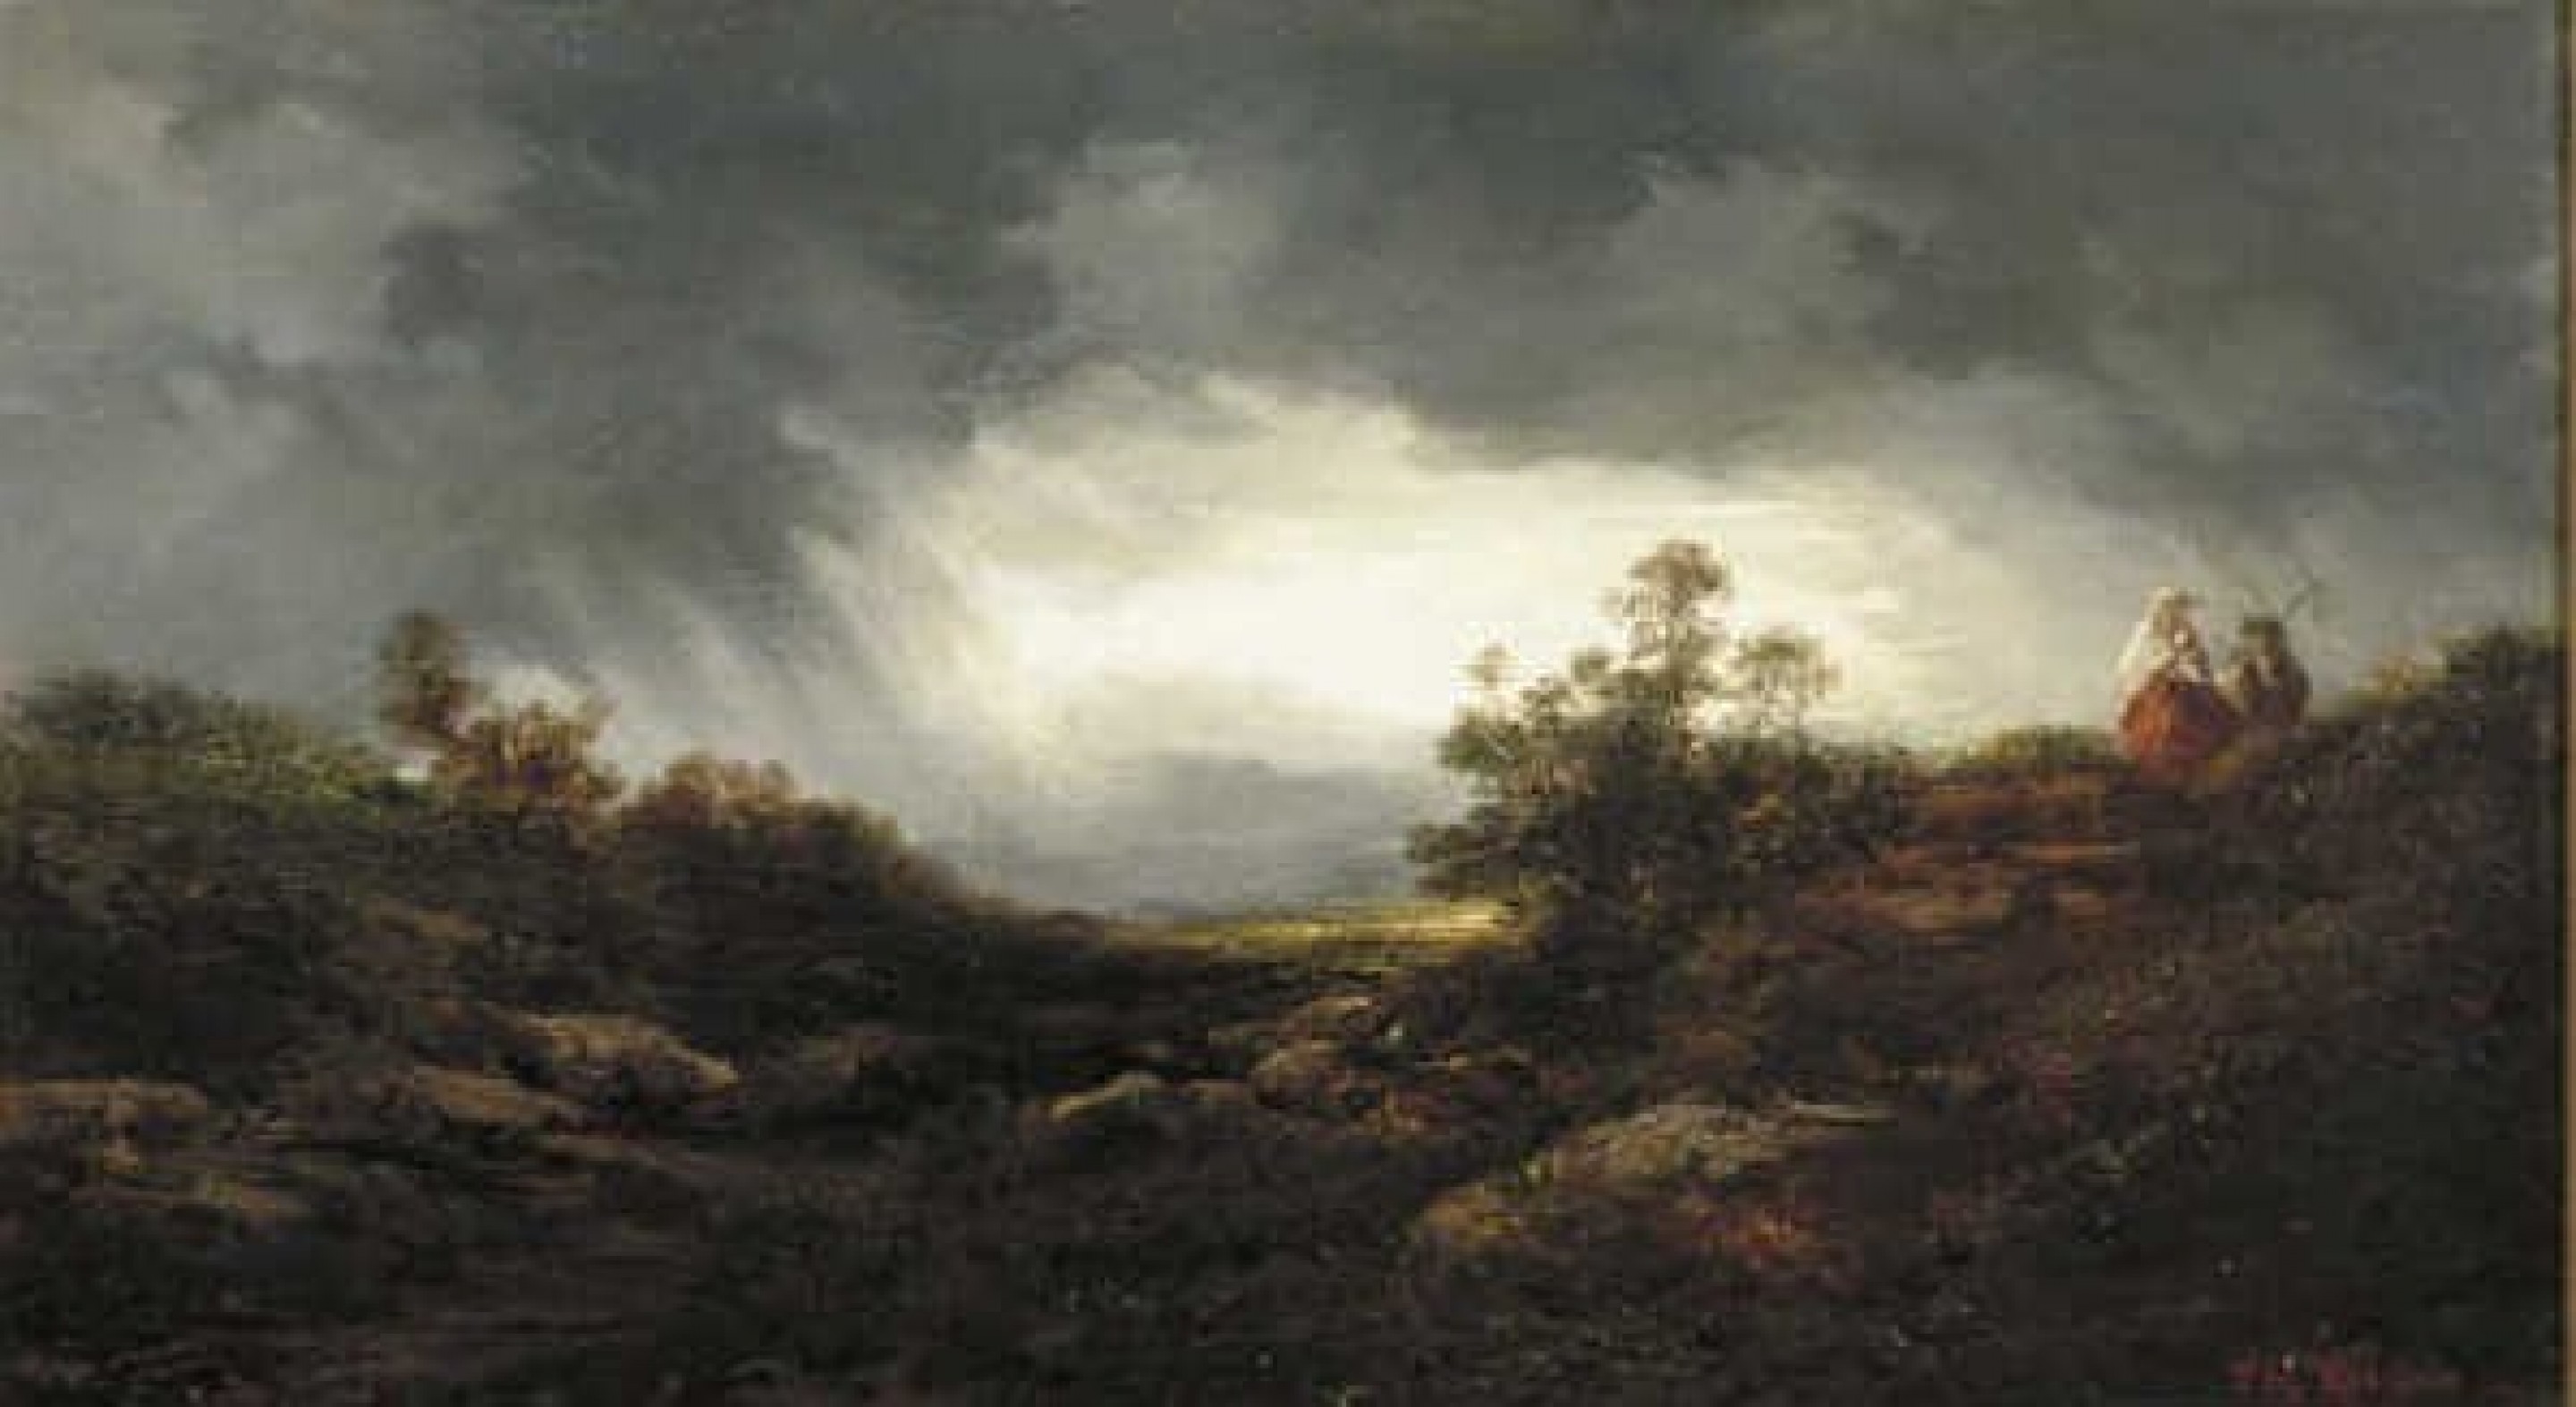 0511_Theodore Rousseau_Rising Storm above a Hilly and Wooded Landscape 썸네일